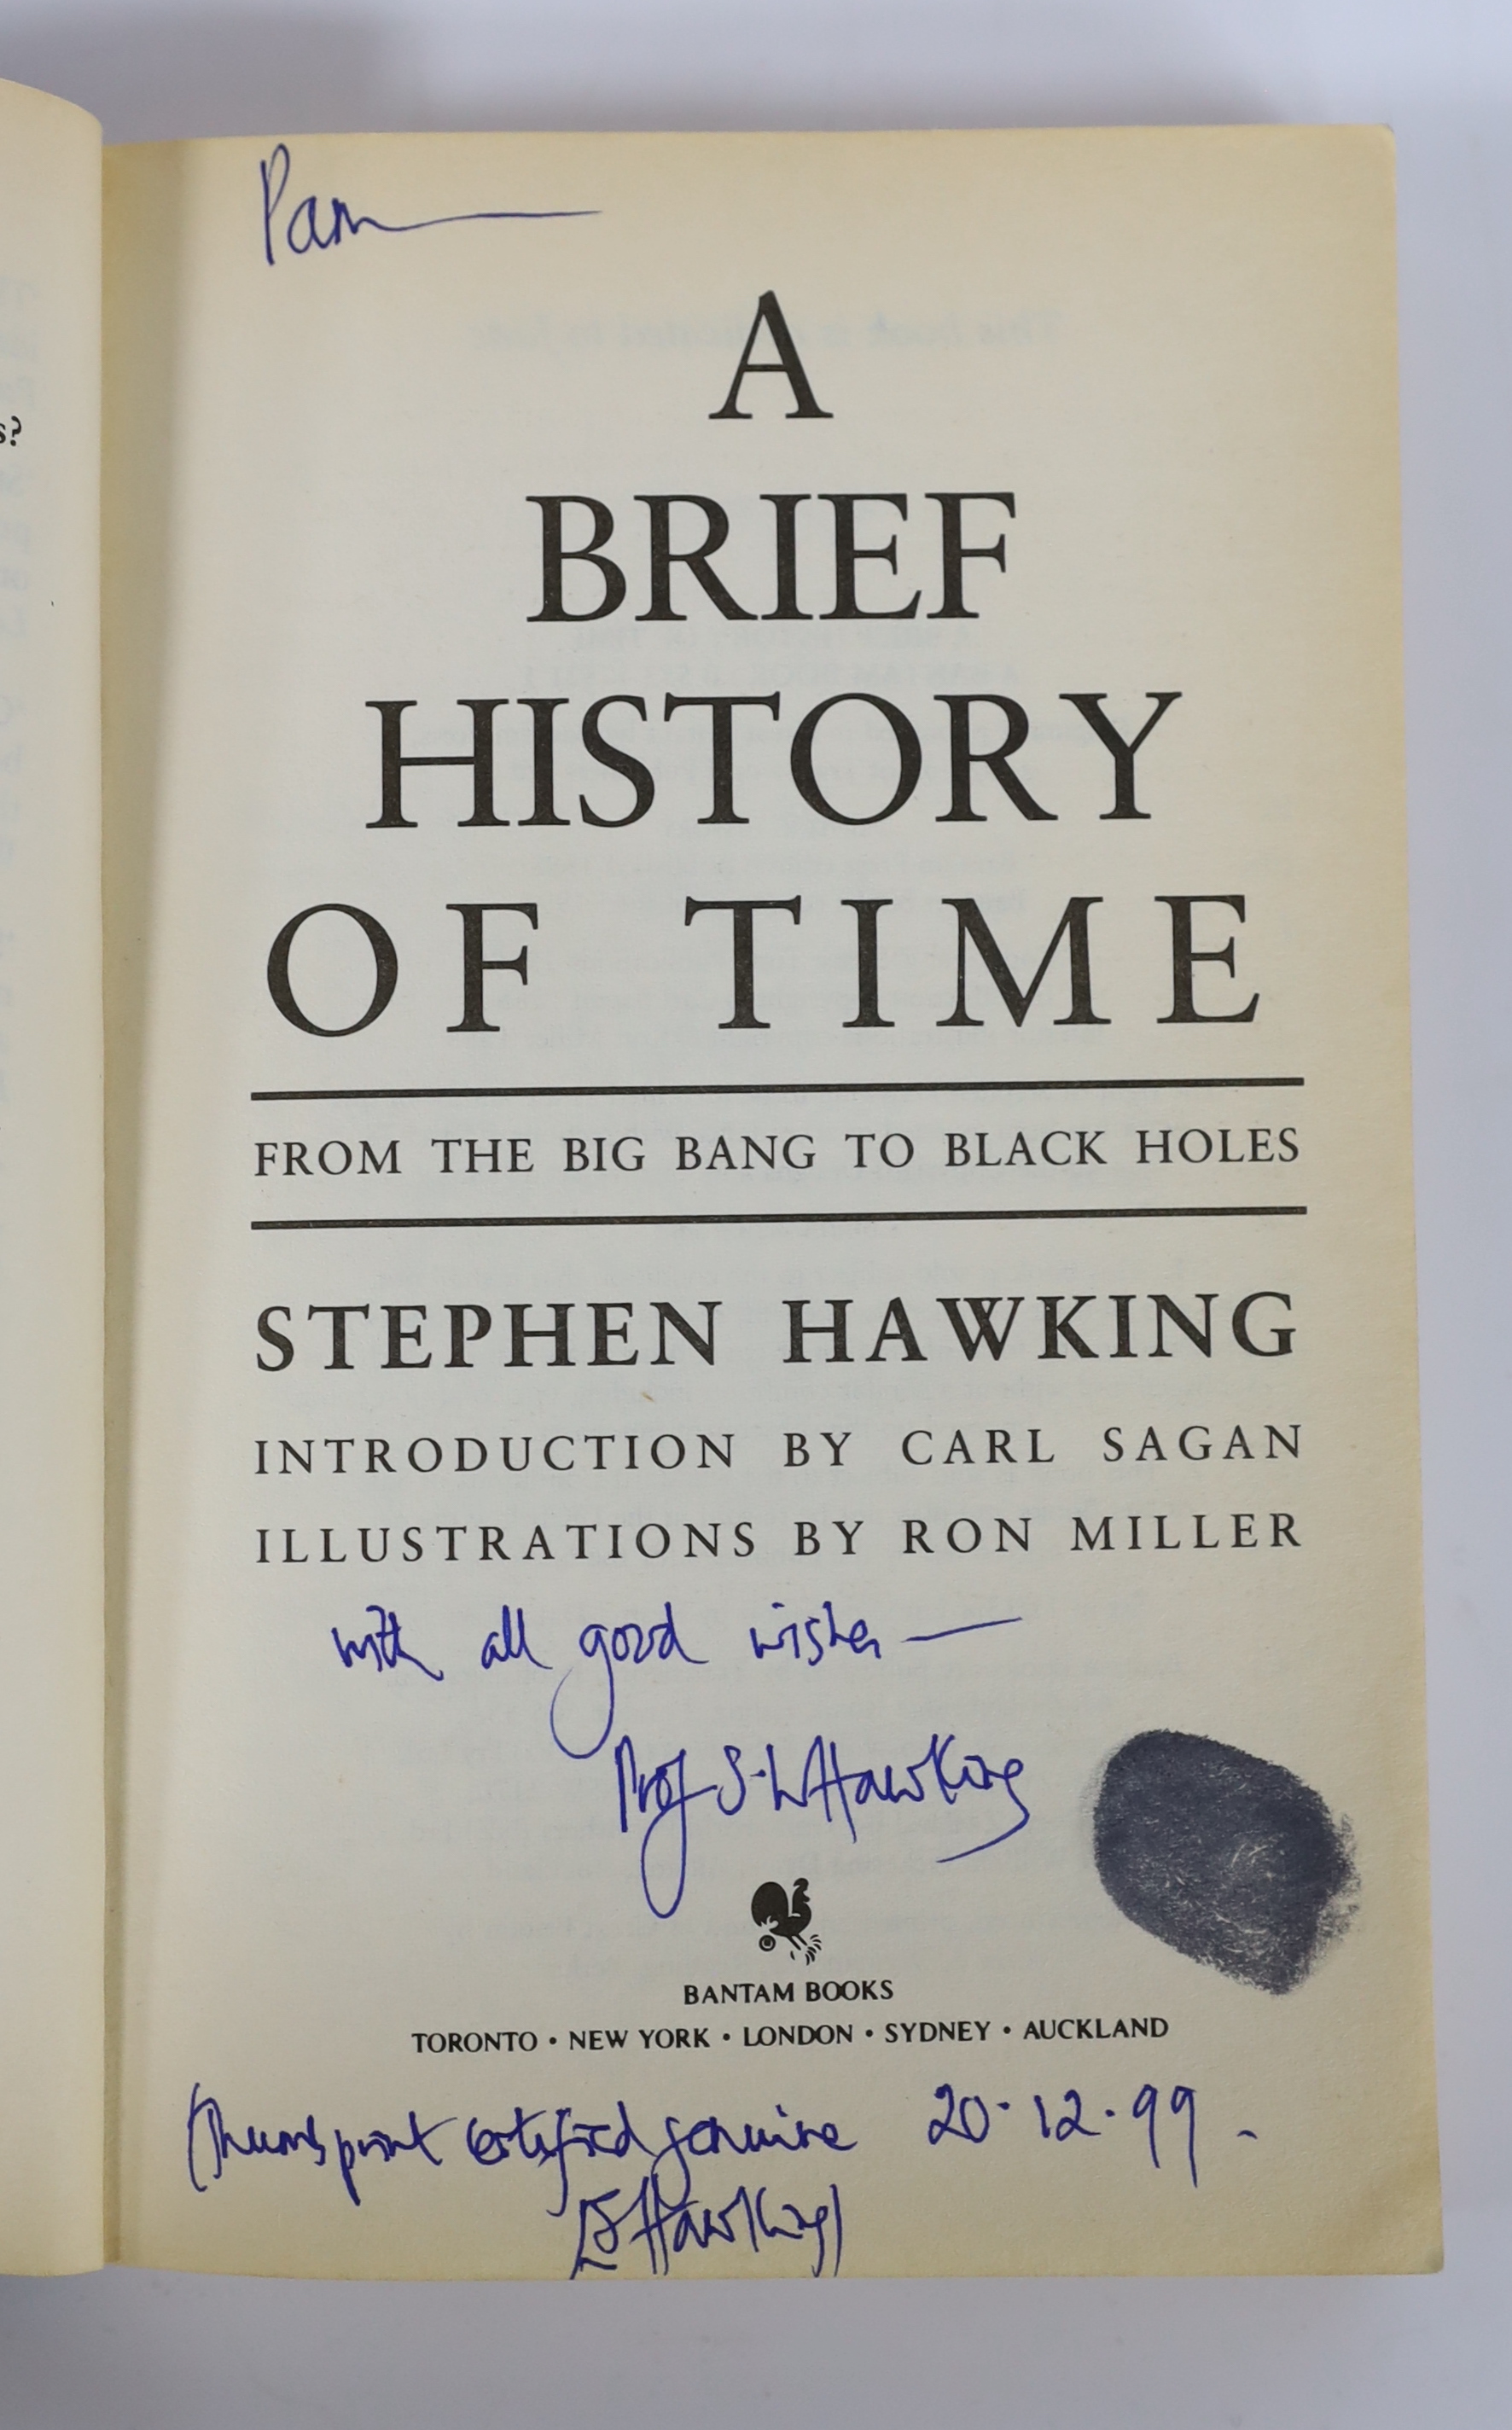 Stephen Hawking; A Brief History of Time, Bantam Books paperback edition, 1995, signed by Stephen Hawking with a thumb print